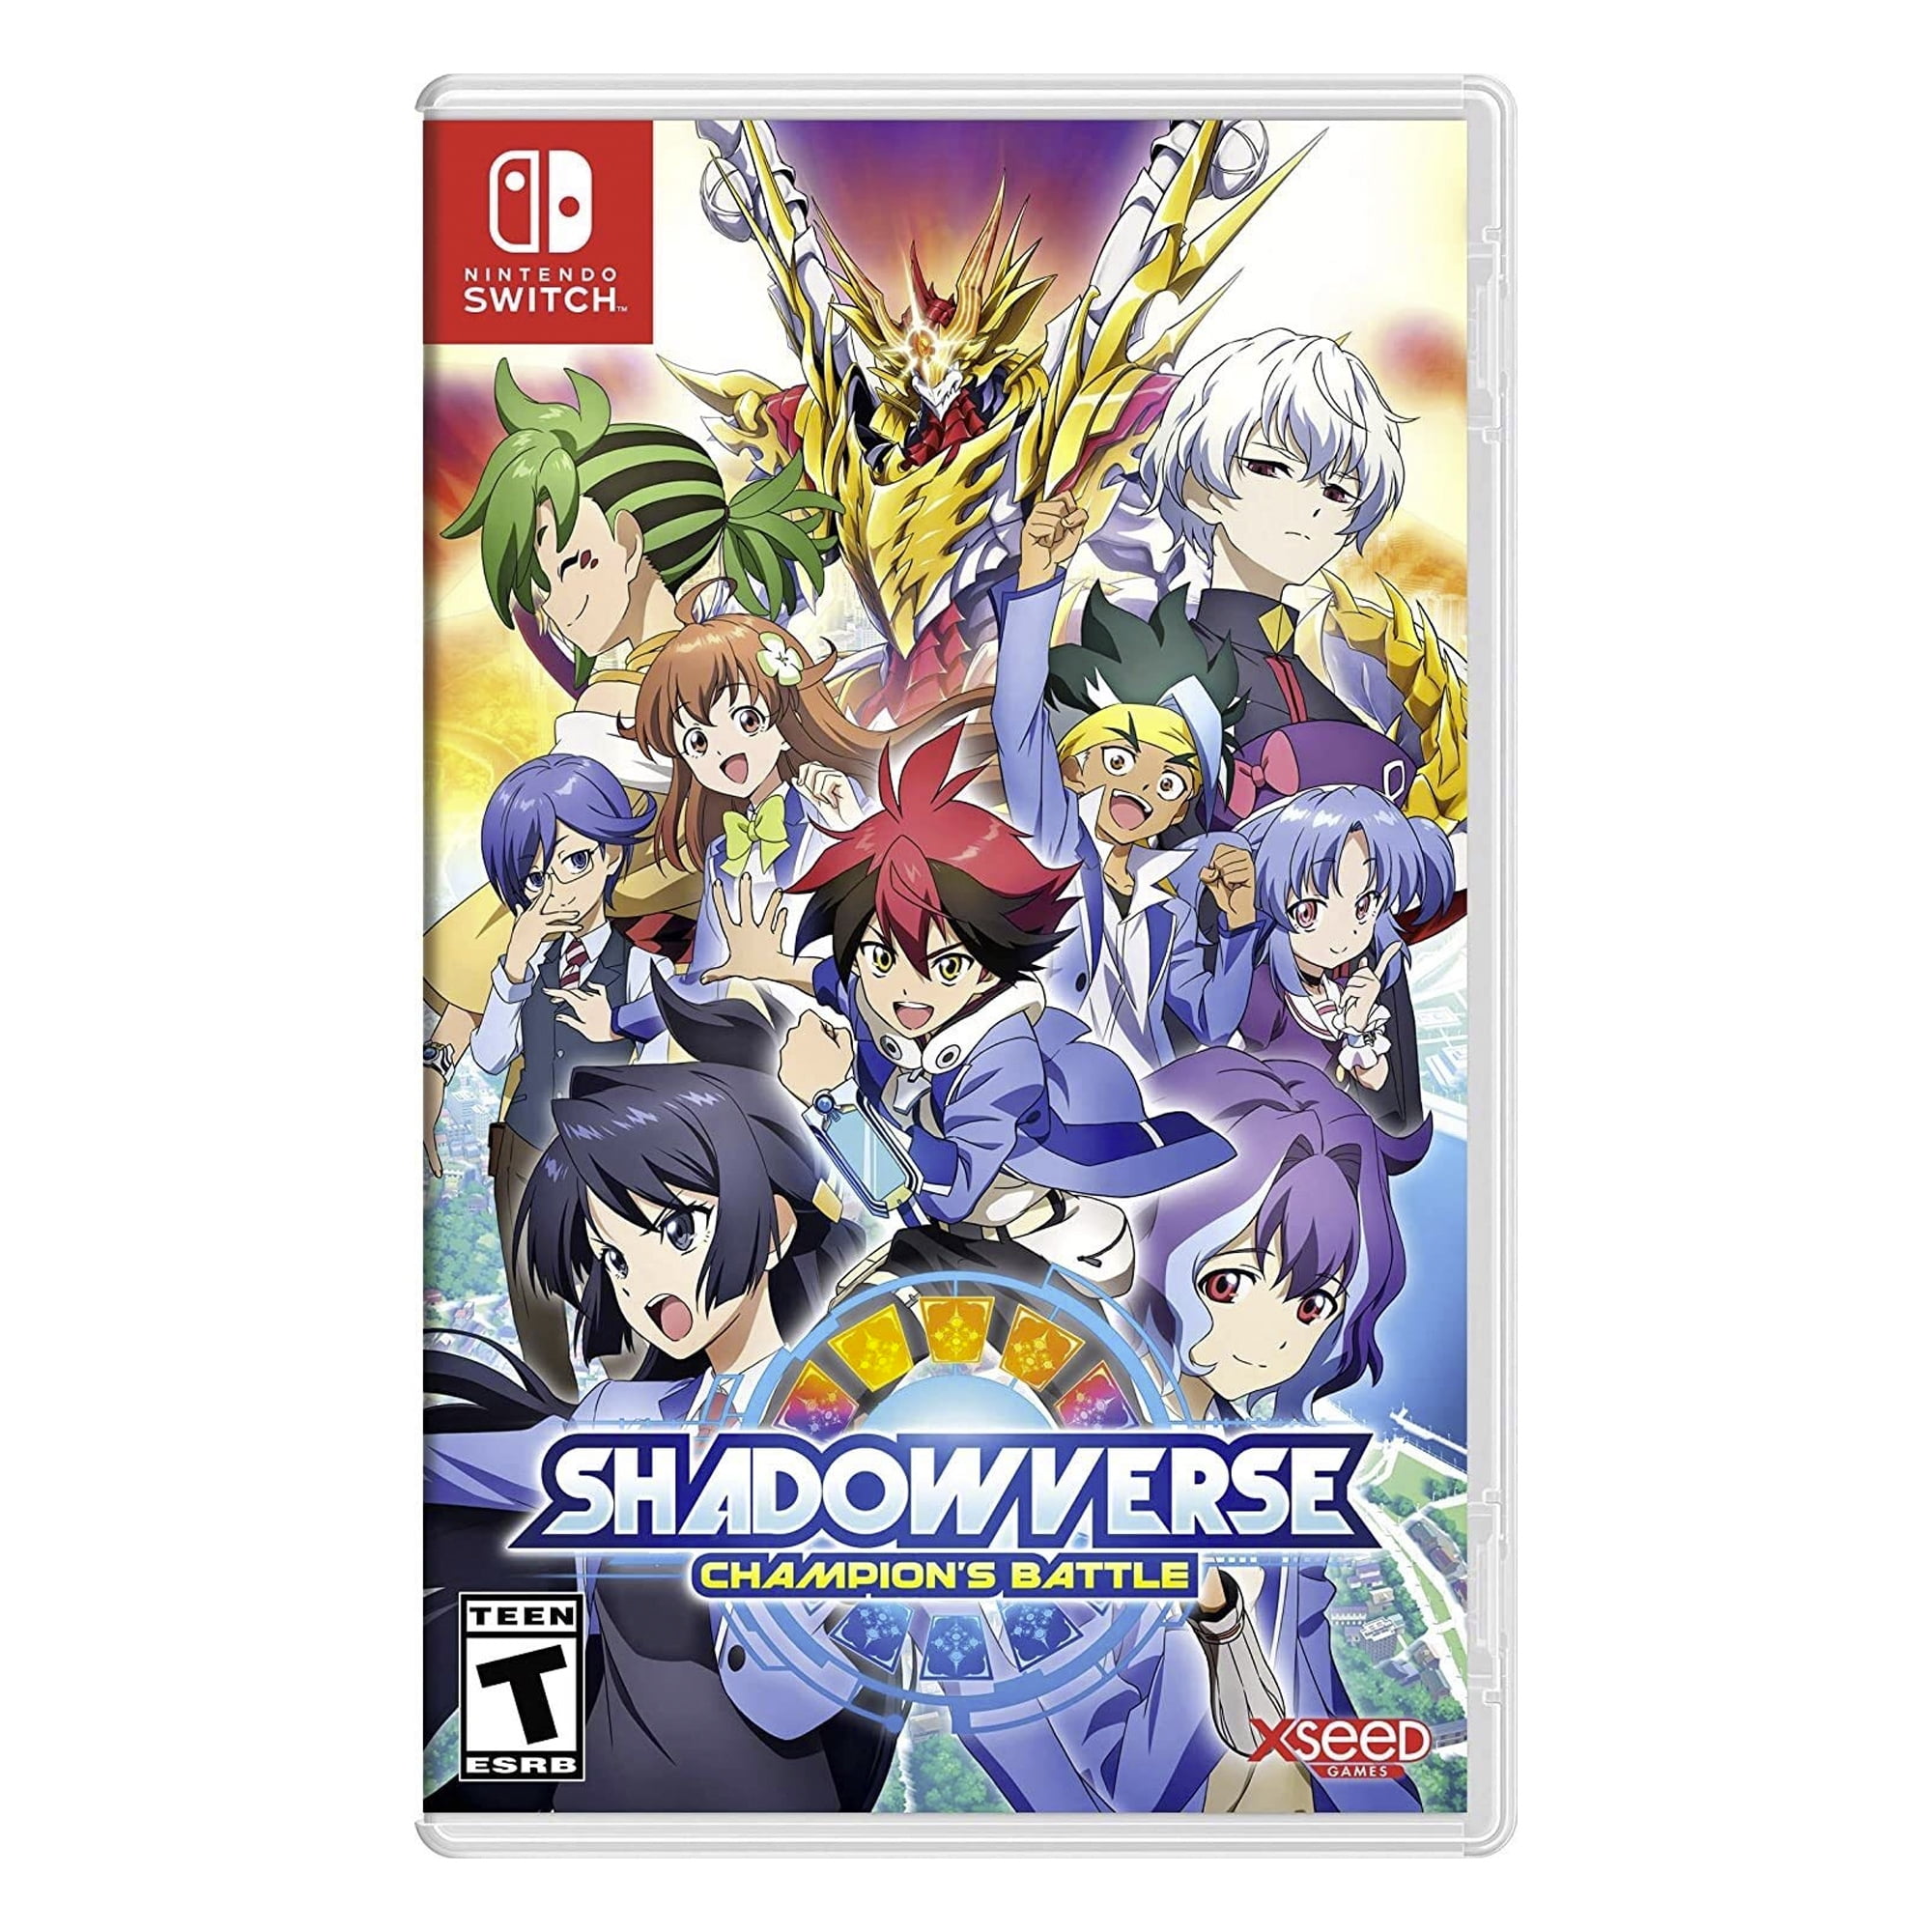 Shadowverse Champion'S Battle, Xseed, Nintendo Switch, [Physical], 859716006550